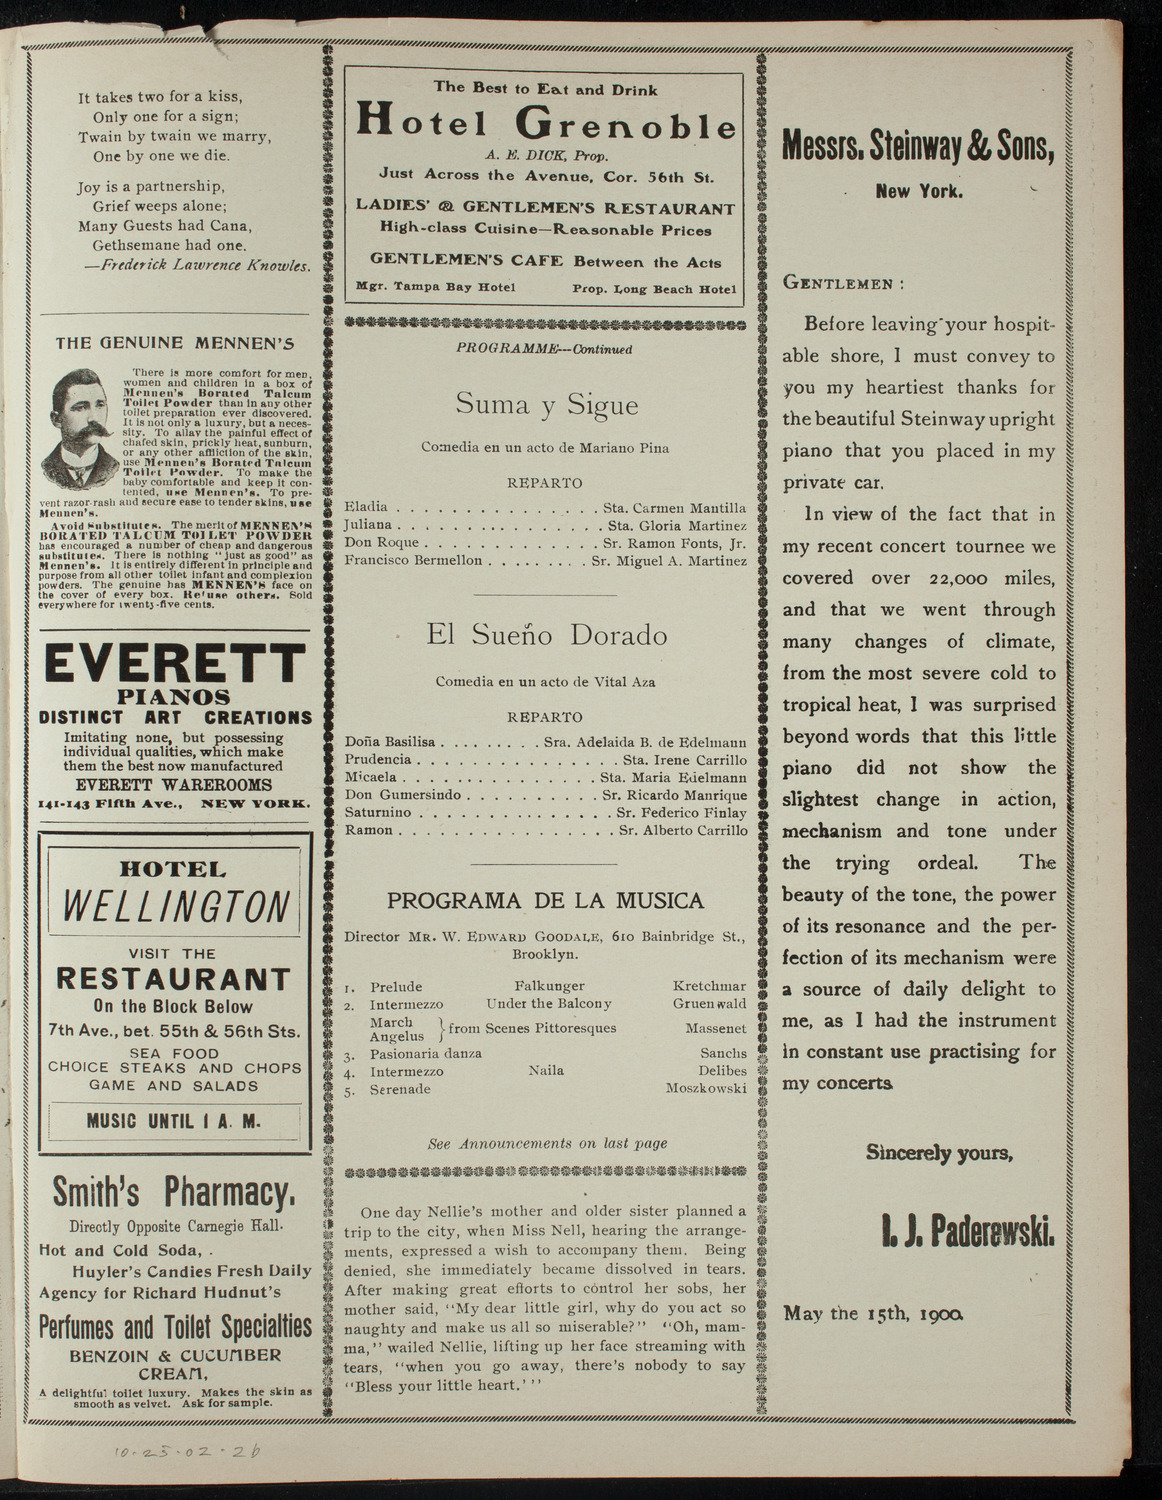 Club Social "Entre Nous" Musical and Dramatic Program, October 25, 1902, program page 3